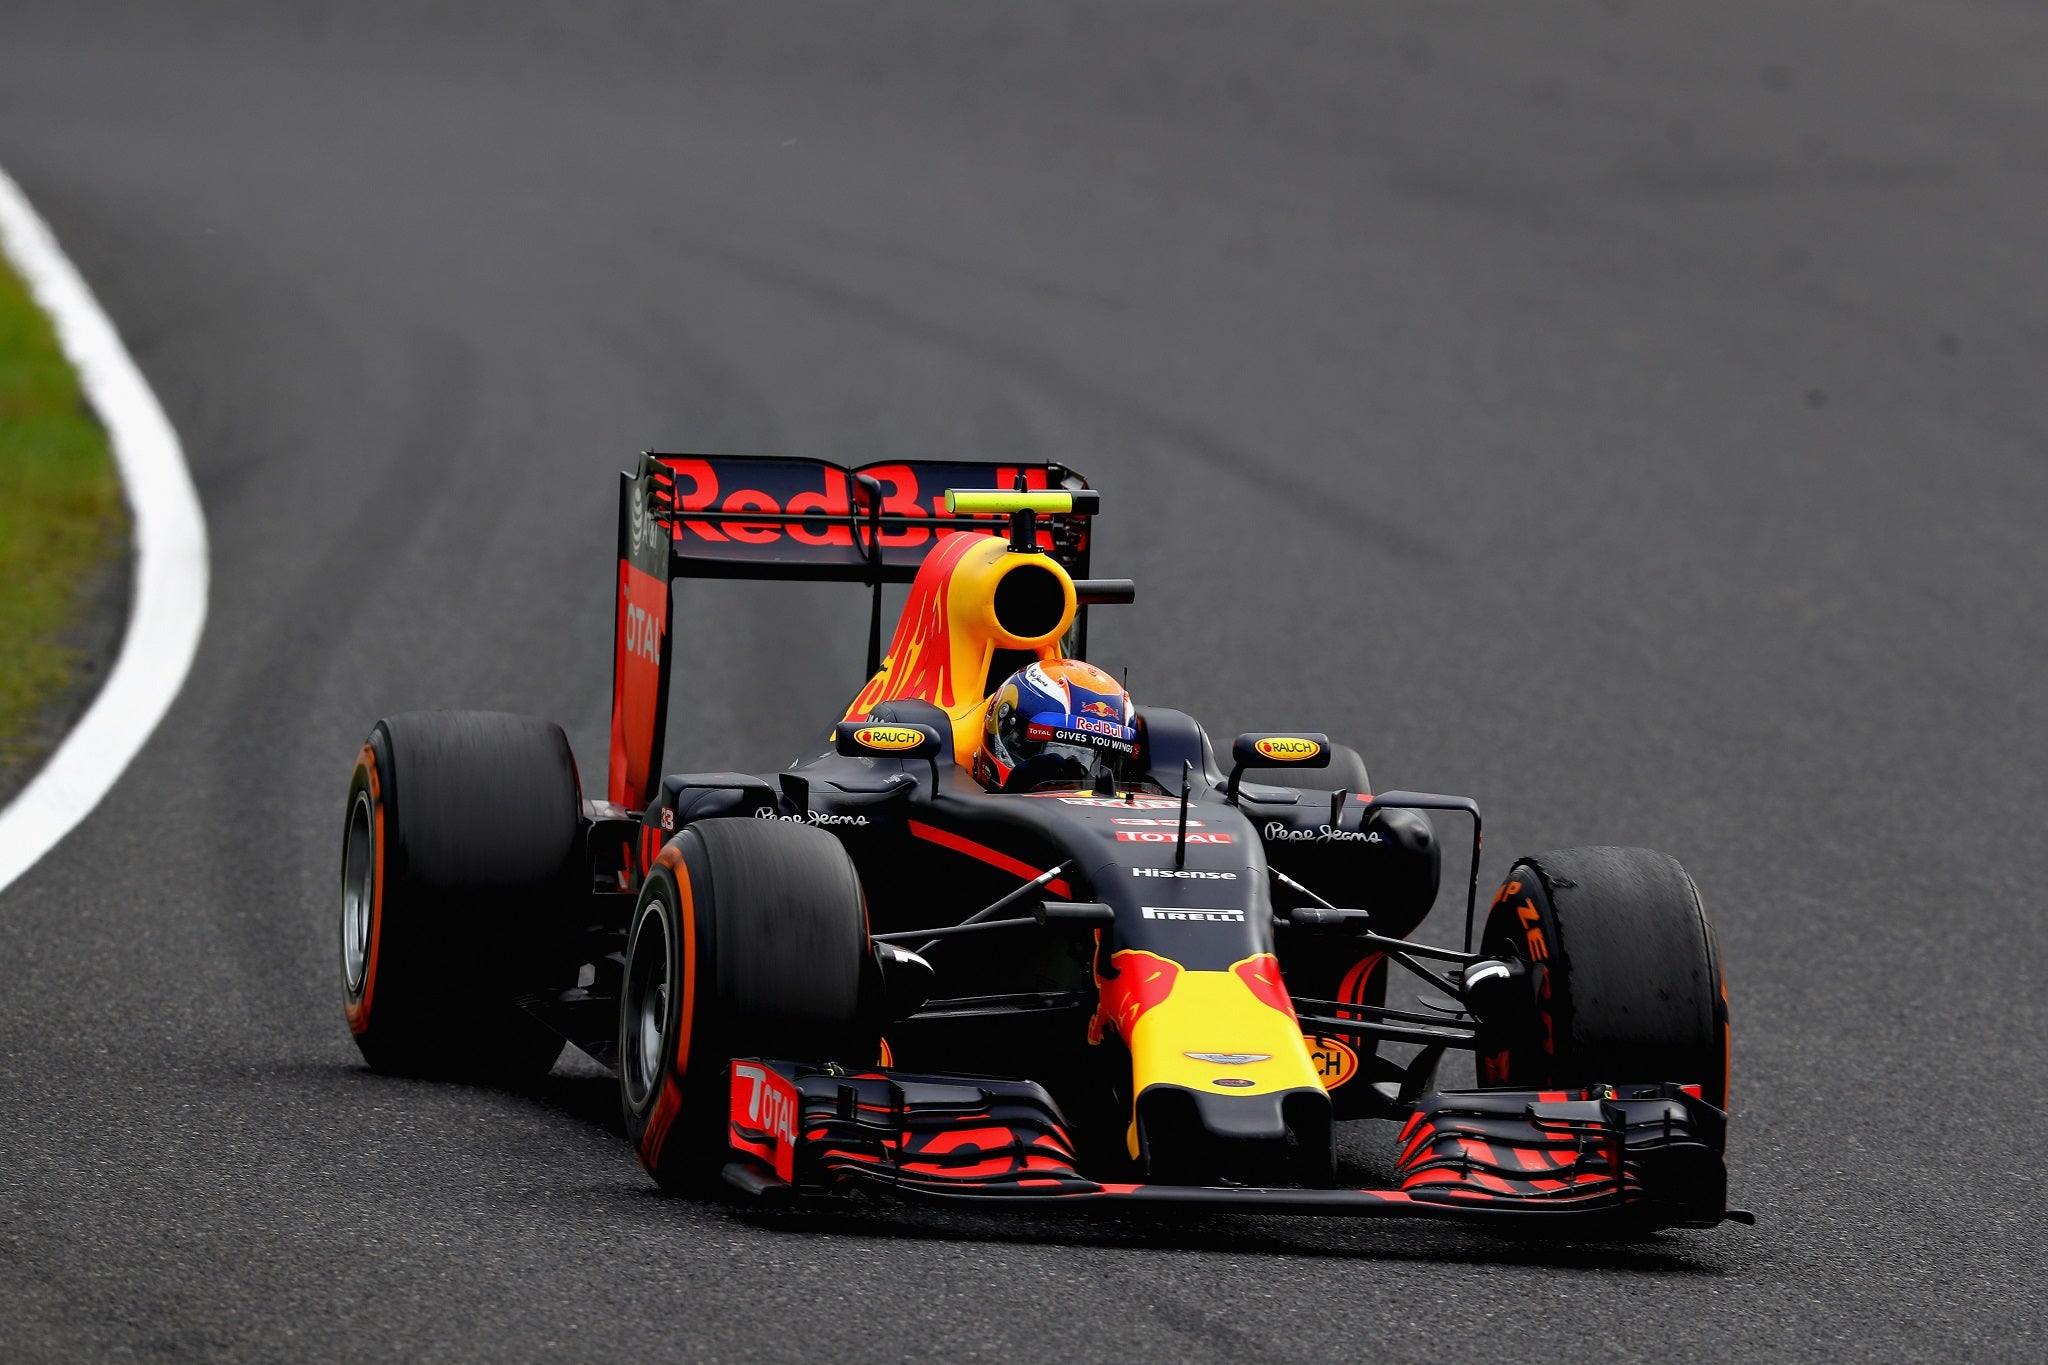 Max Verstappen seized second off the start in passing Lewis Hamilton